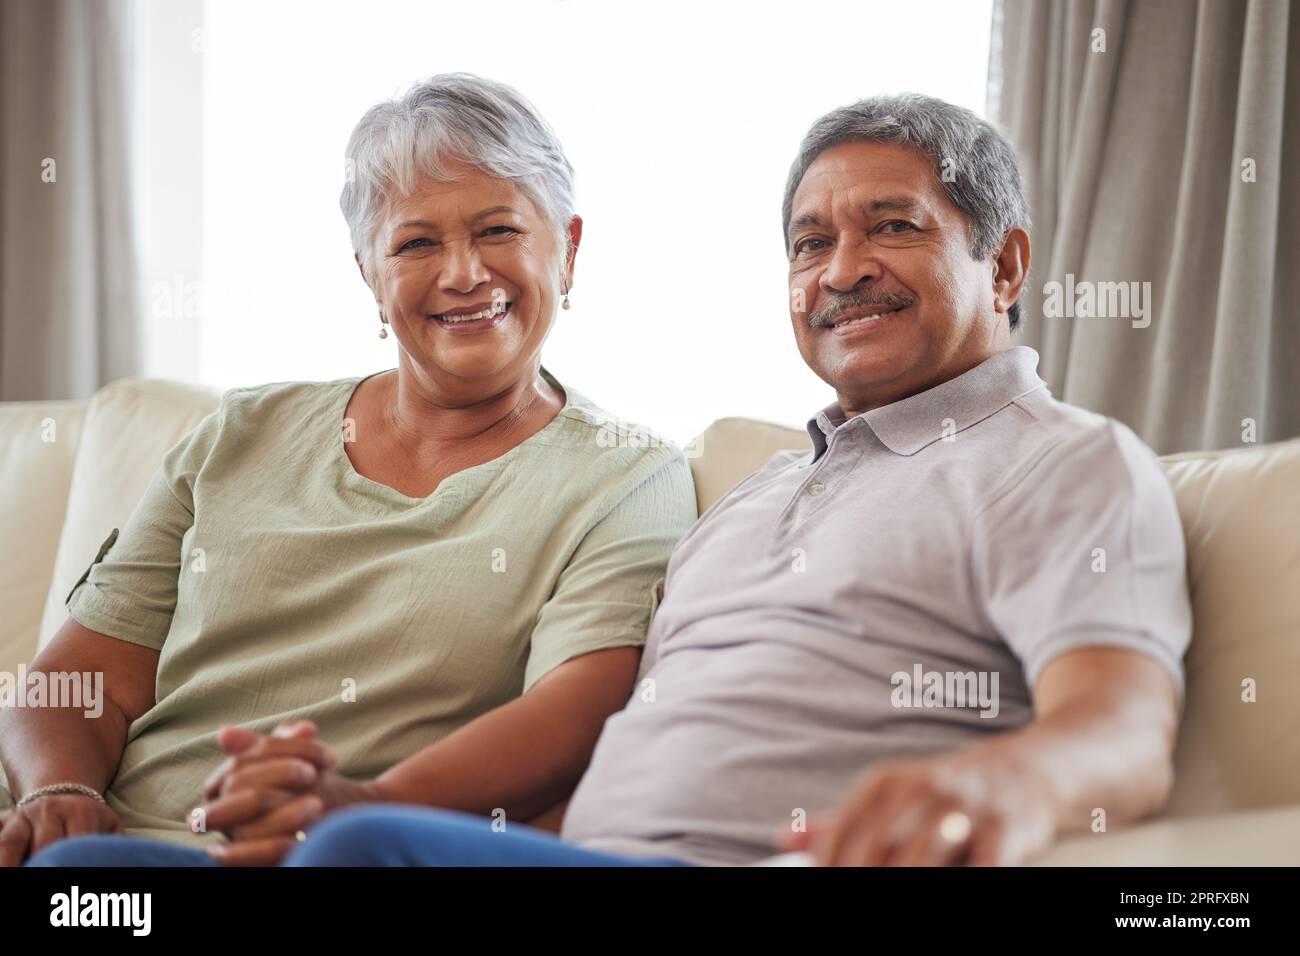 Love, smile and senior couple on living room interior sofa relax and lounge together at home portrait. Face of happy people, man and woman smile while living retirement lifestyle at family house Stock Photo